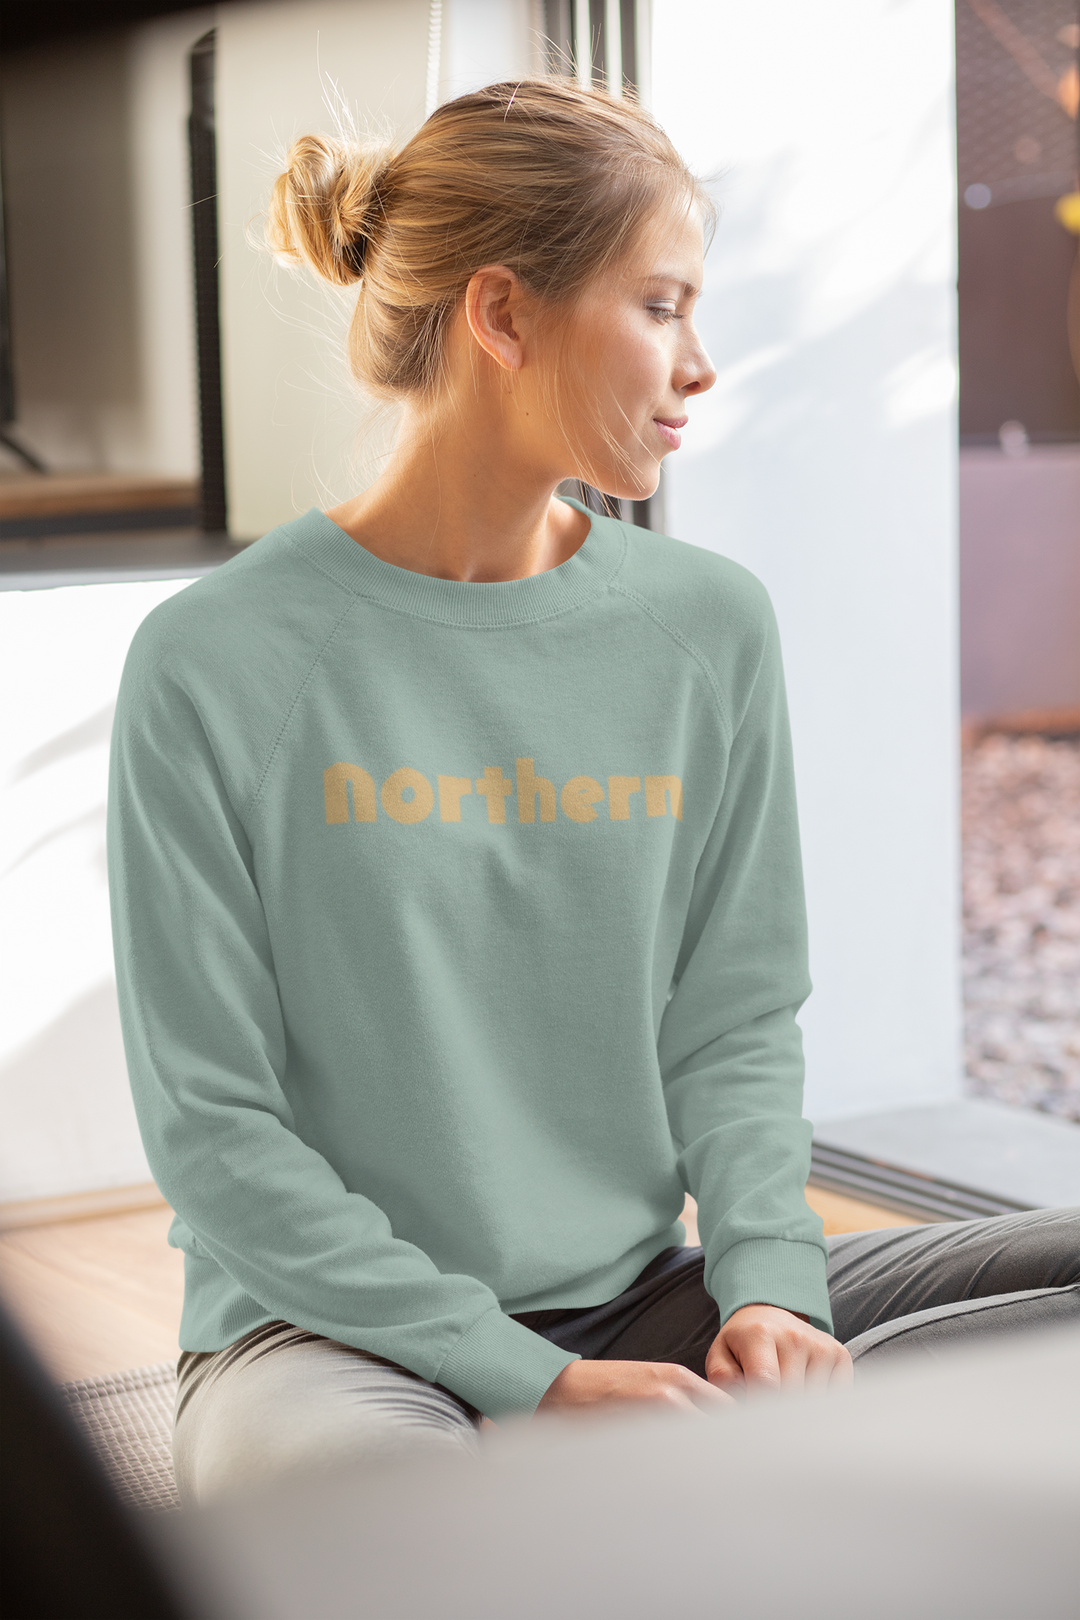 Northern Neutral Sweater - Limited Edition